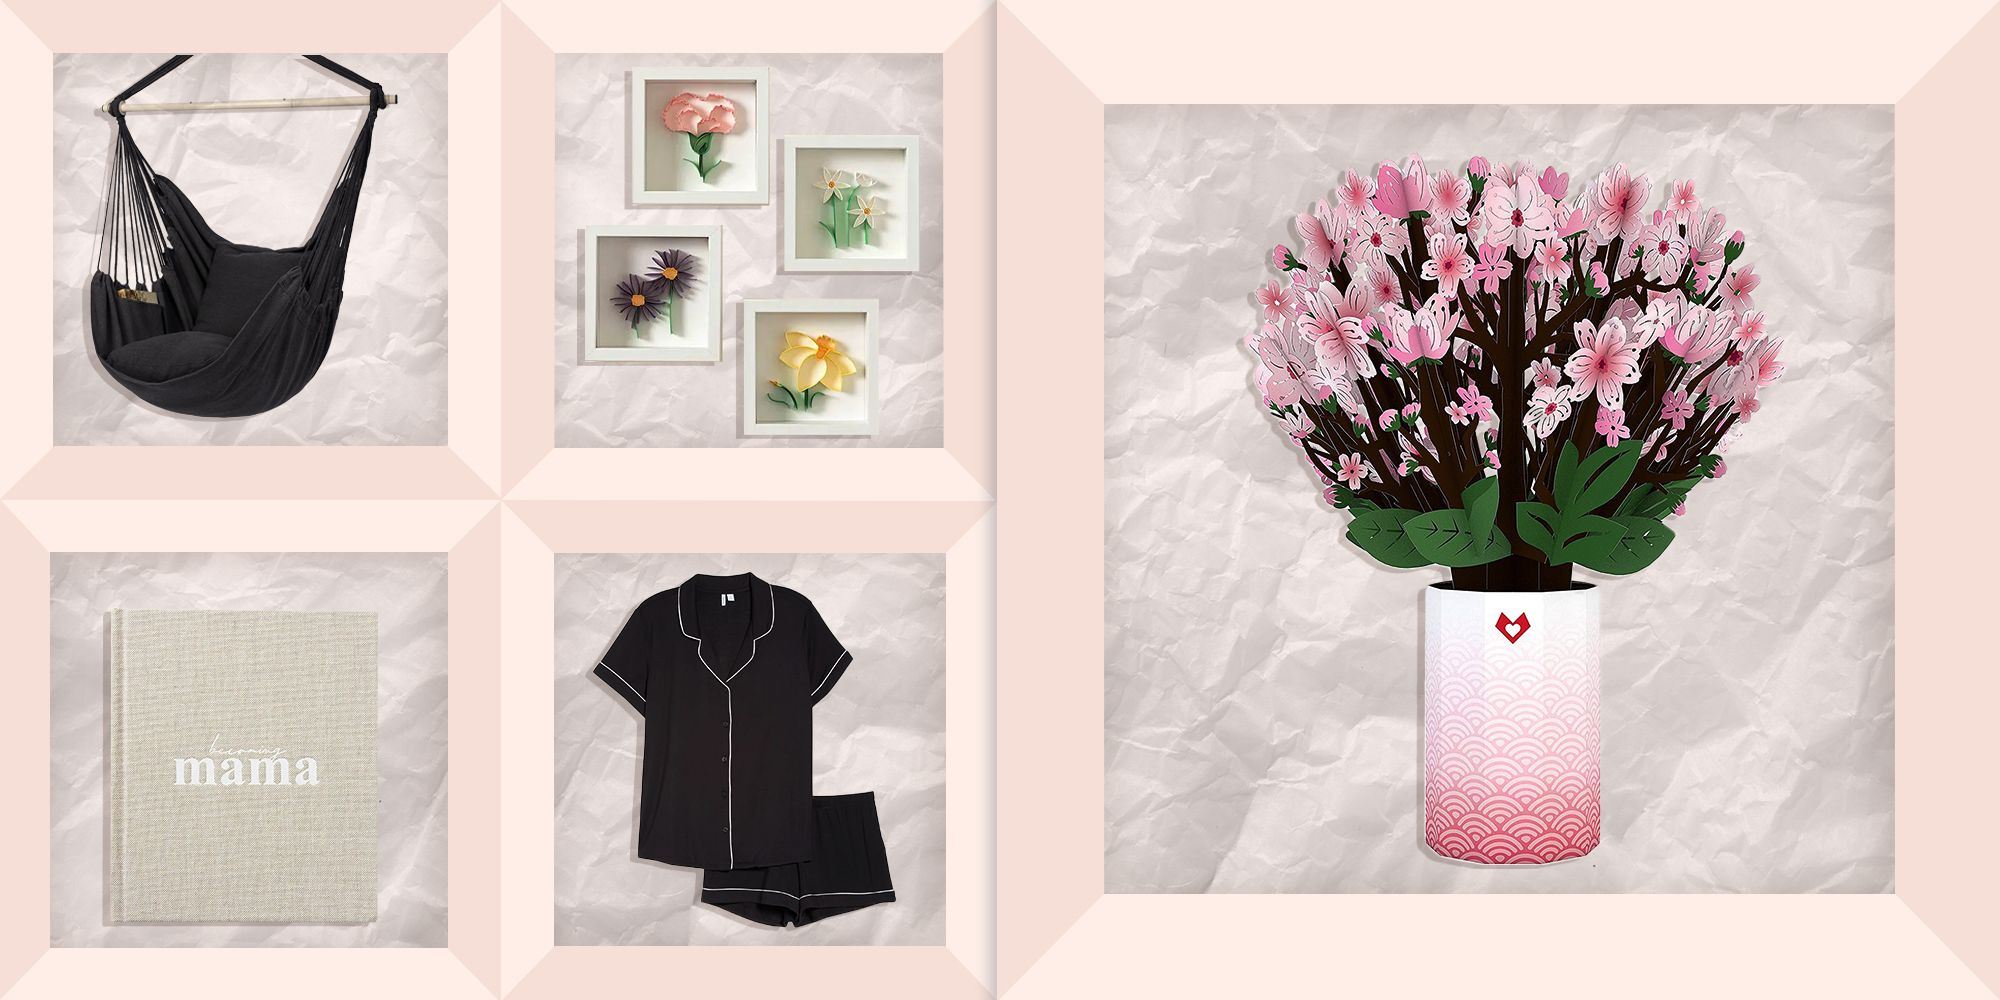 23 last-minute Mother's Day gifts that don't require shipping